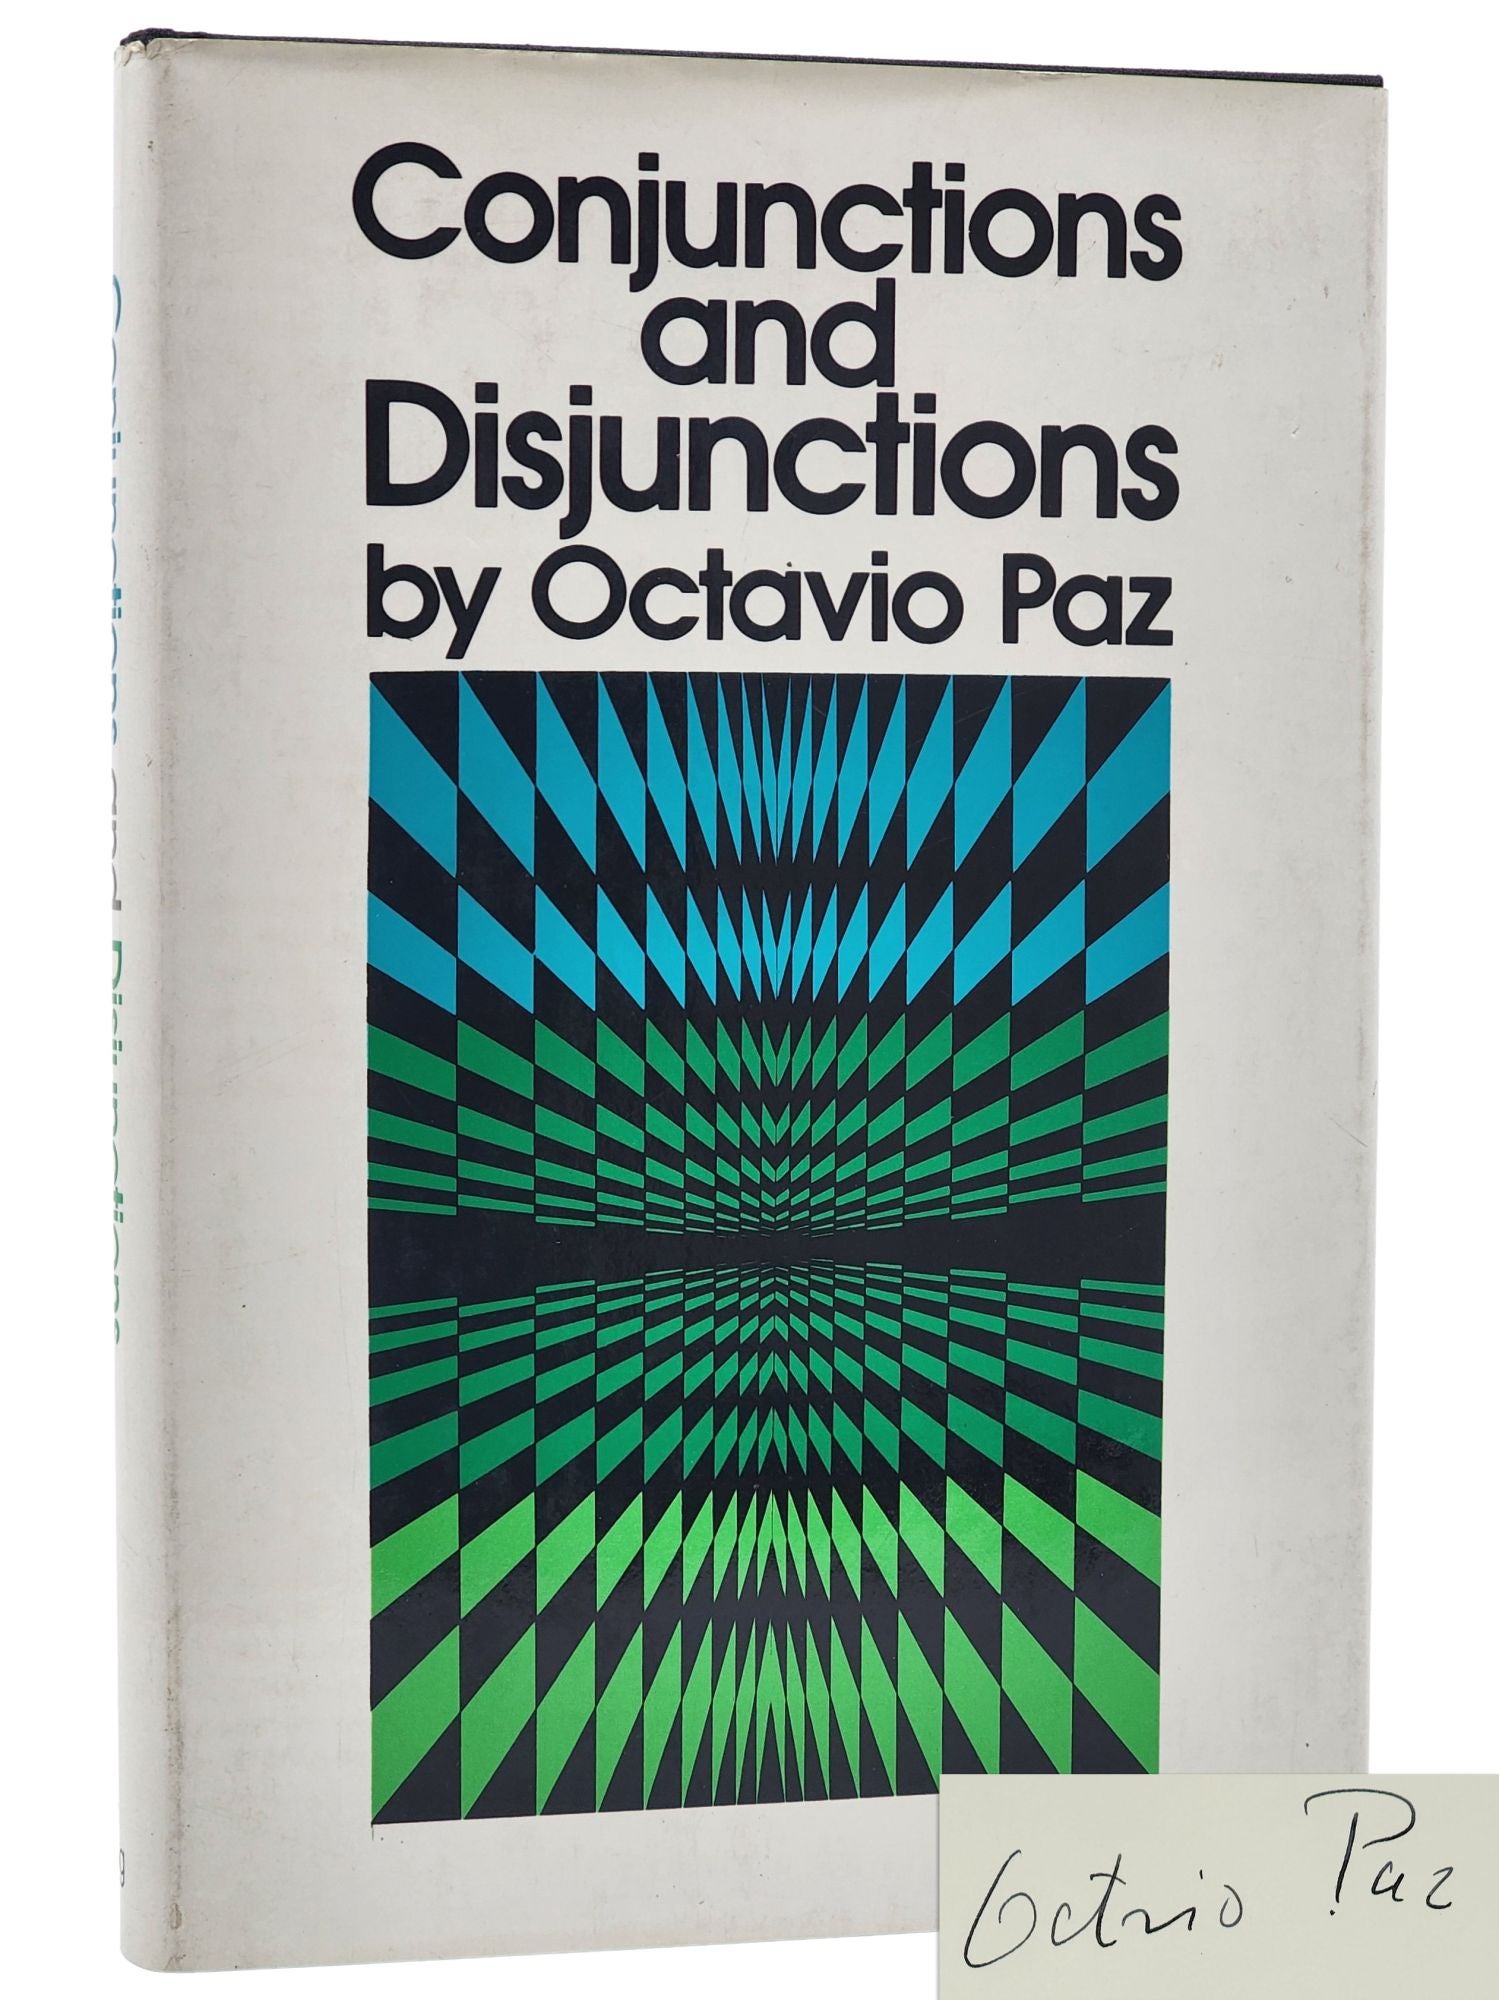 [Book #29461] CONJUNCTIONS AND DISJUNCTIONS. Octavio Paz.